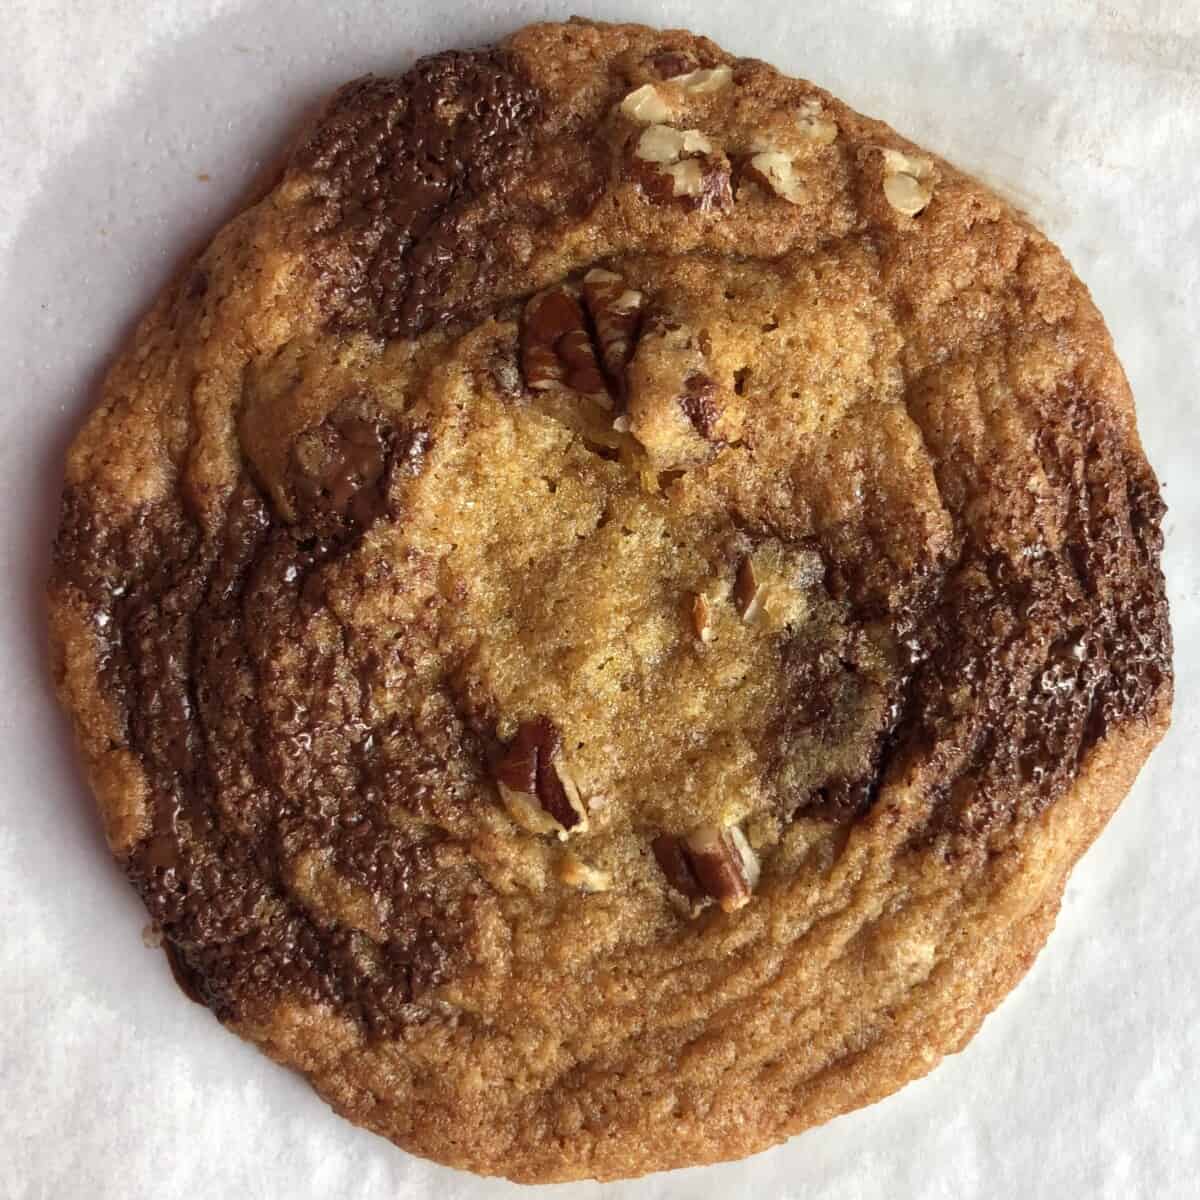 chilled dough baked chocolate chip pecan cookie very soft and chewy, slightly wrinkled, with less spreading